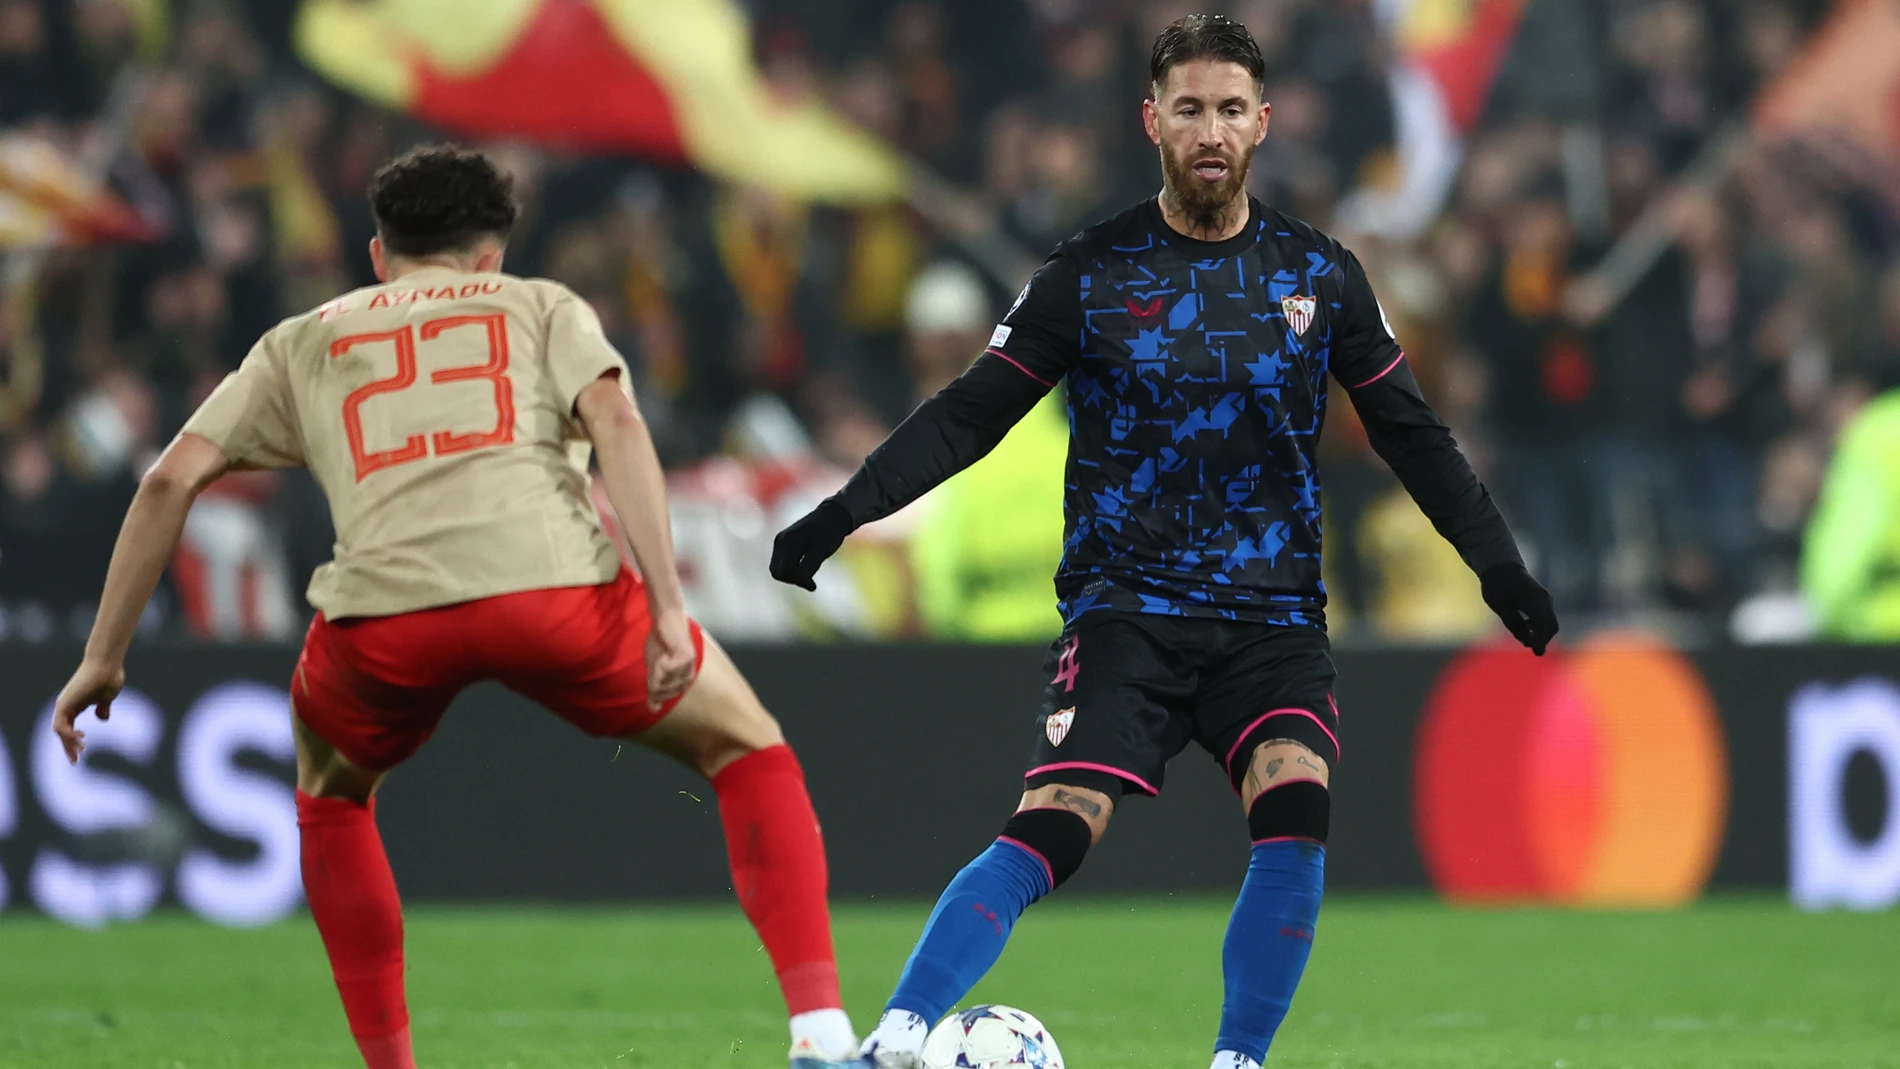 Lens (France), 12/12/2023.- Sergio Ramos of Sevilla in action during the UEFA Champions League group stage match between RC Lens and Sevilla FC, in Lens, France, 12 December 2023. (Liga de Campeones, Francia) EFE/EPA/MOHAMMED BADRA 